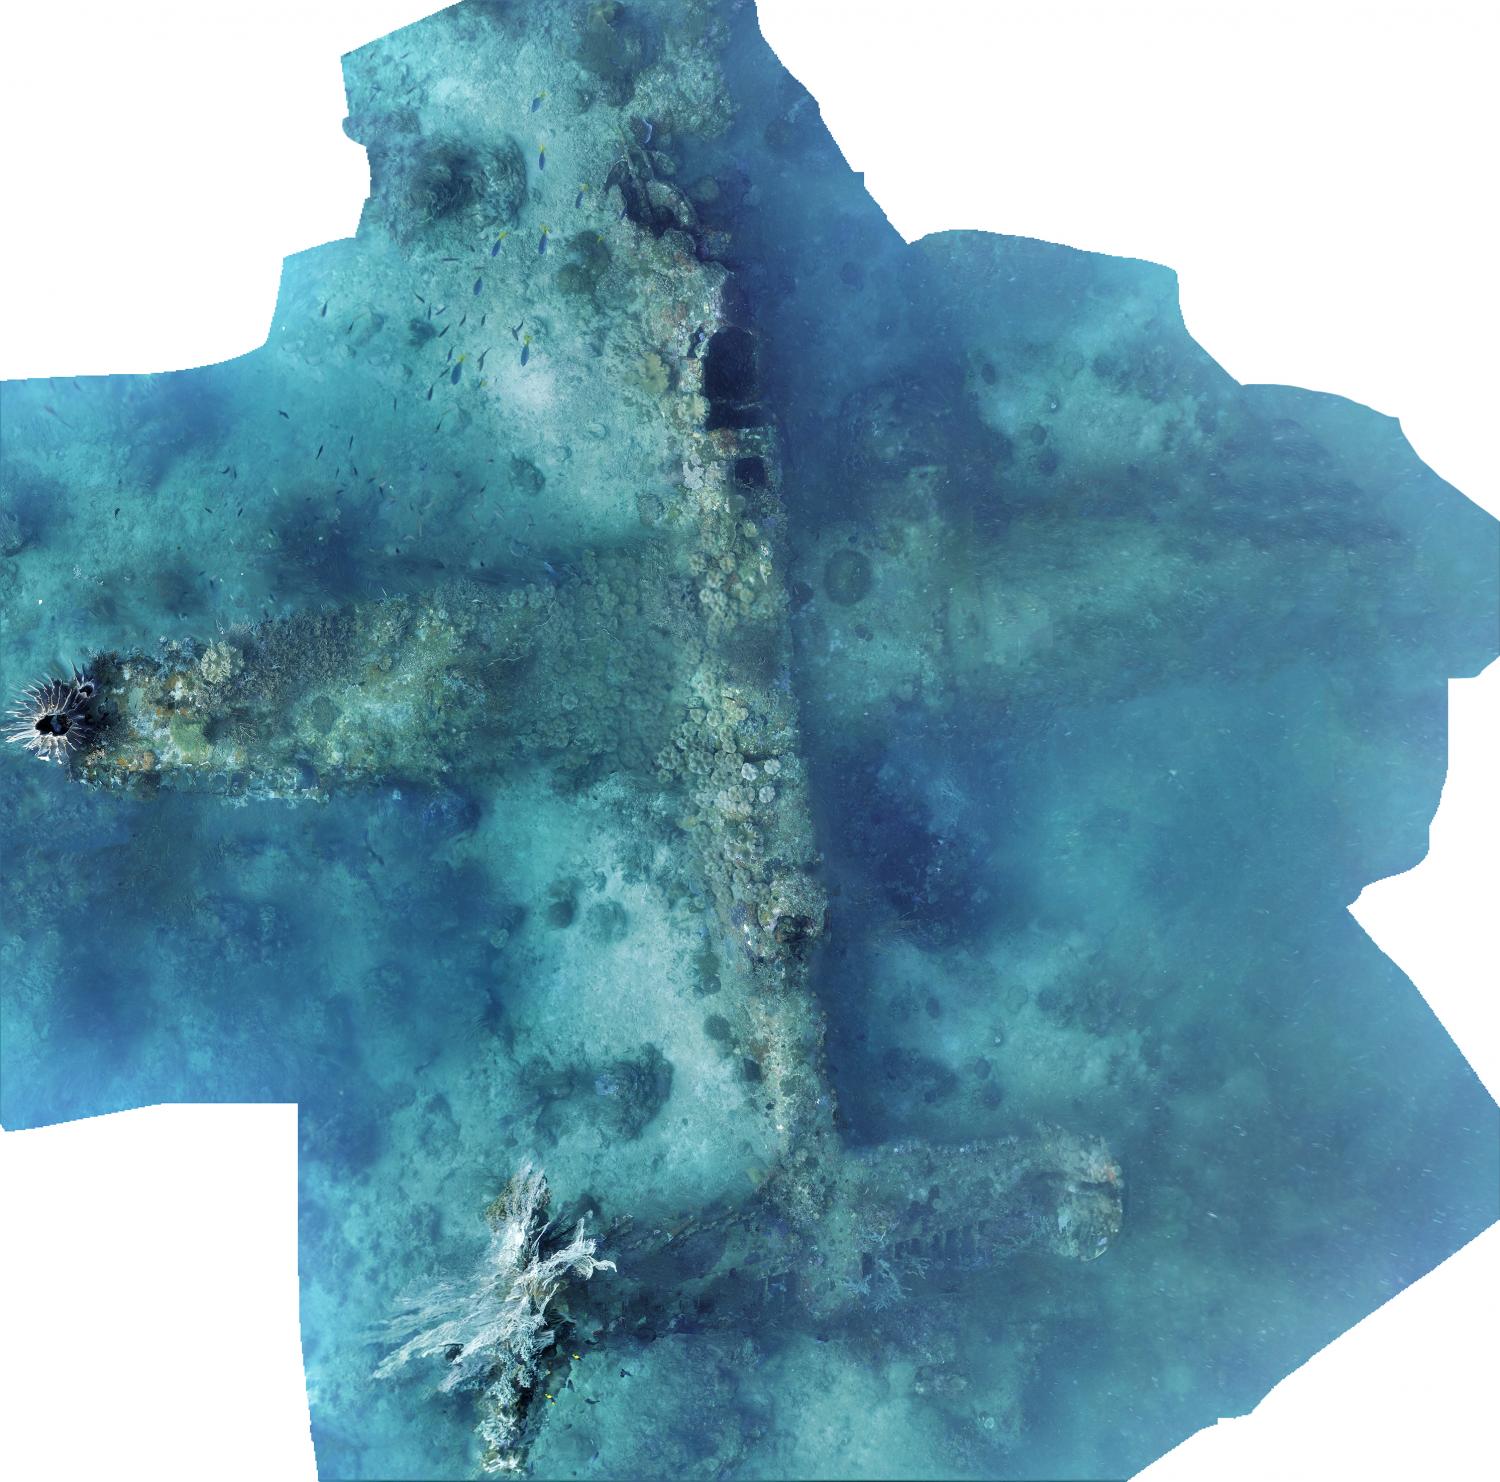 A photomosaic constructed by Project Recover of an underwater wreck of a WWII B-25 bomber. Credit: Project Recover Read more at: https://phys.org/news/2017-05-world-war-ii-b-bombers.html#jCp